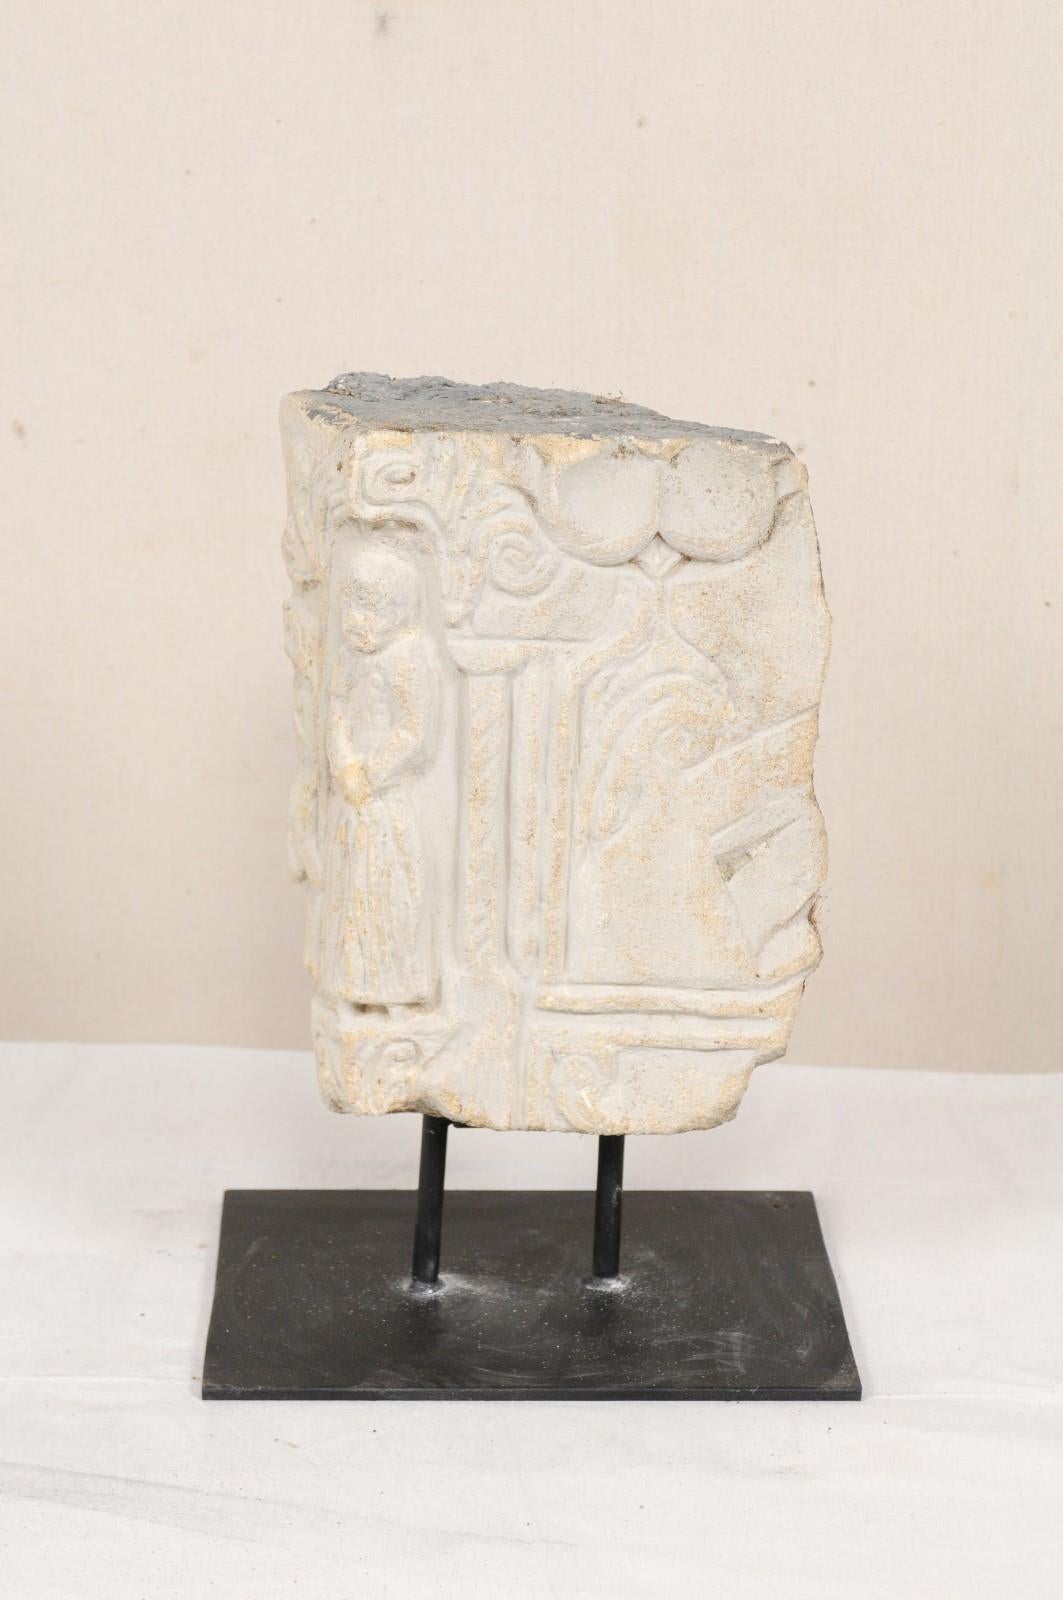 A splendid 18th to 19th century carved stone architectural fragment from Aragon, Spain. This antique architectural fragment from Aragon has been hand-carved of stone, featuring a robed figure standing within a columned entry and decorative